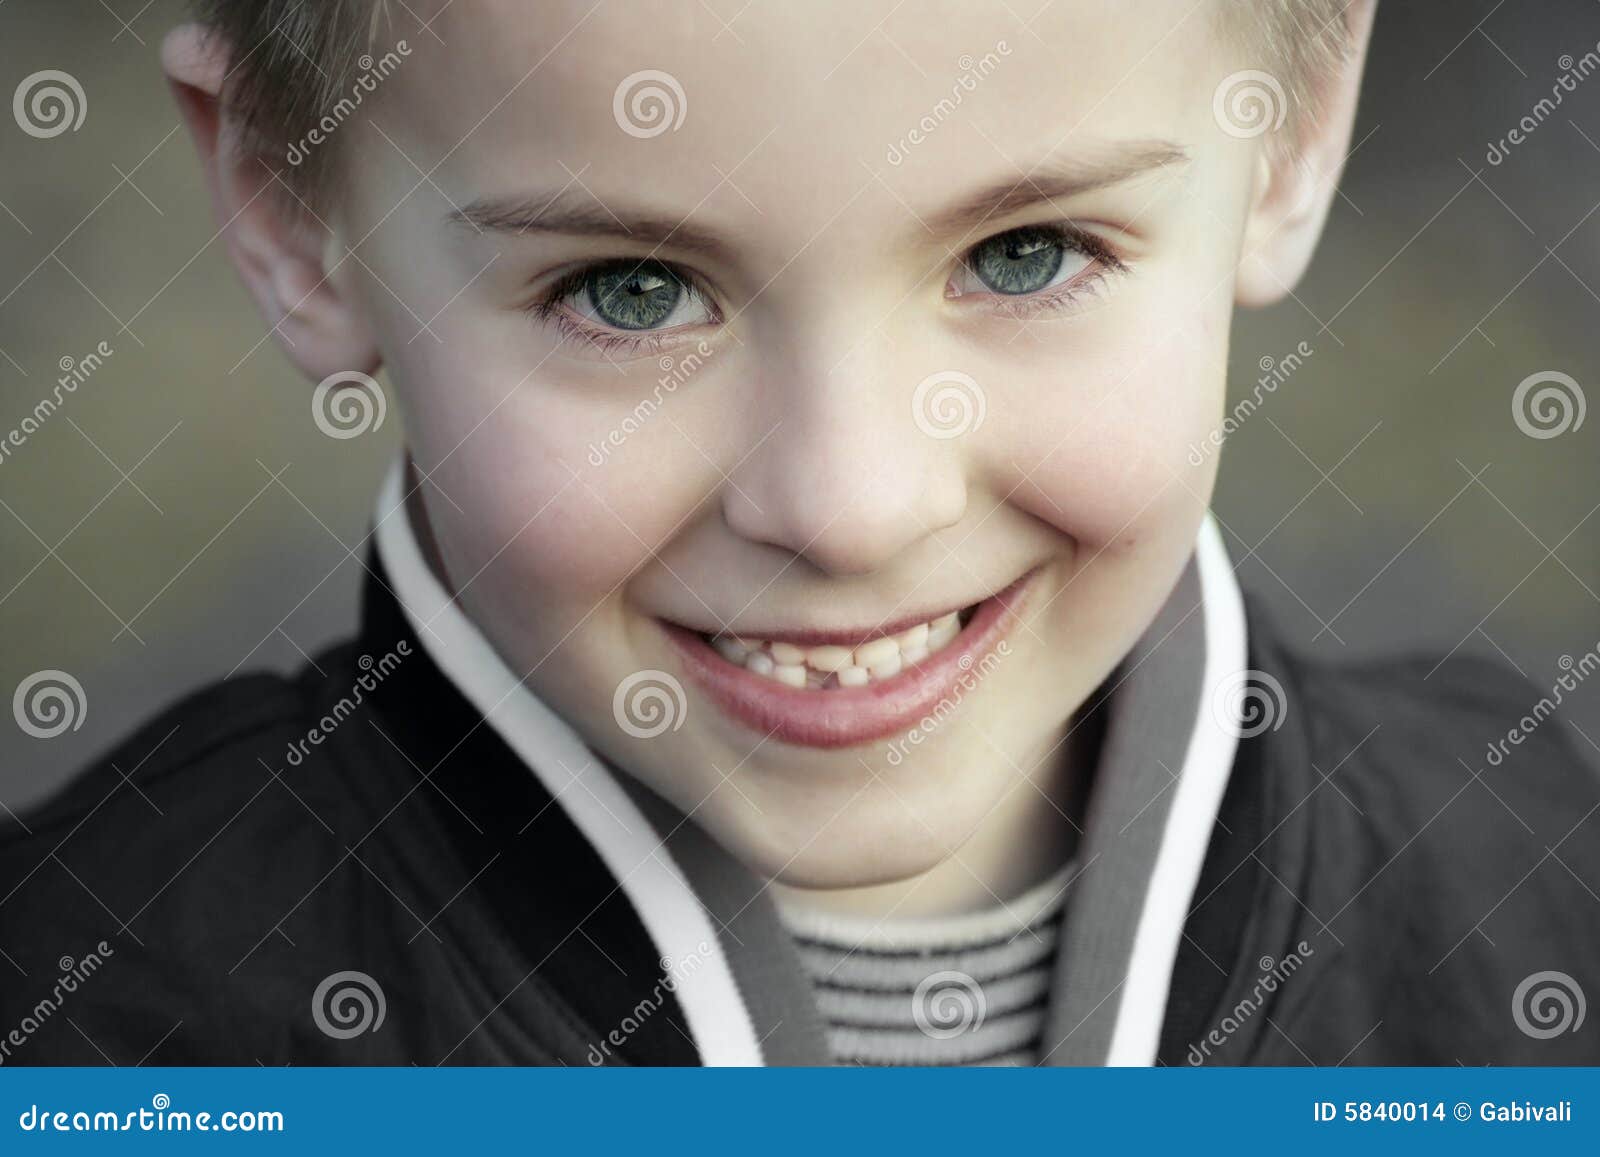 smiling innocent kid with perfect blue eyes